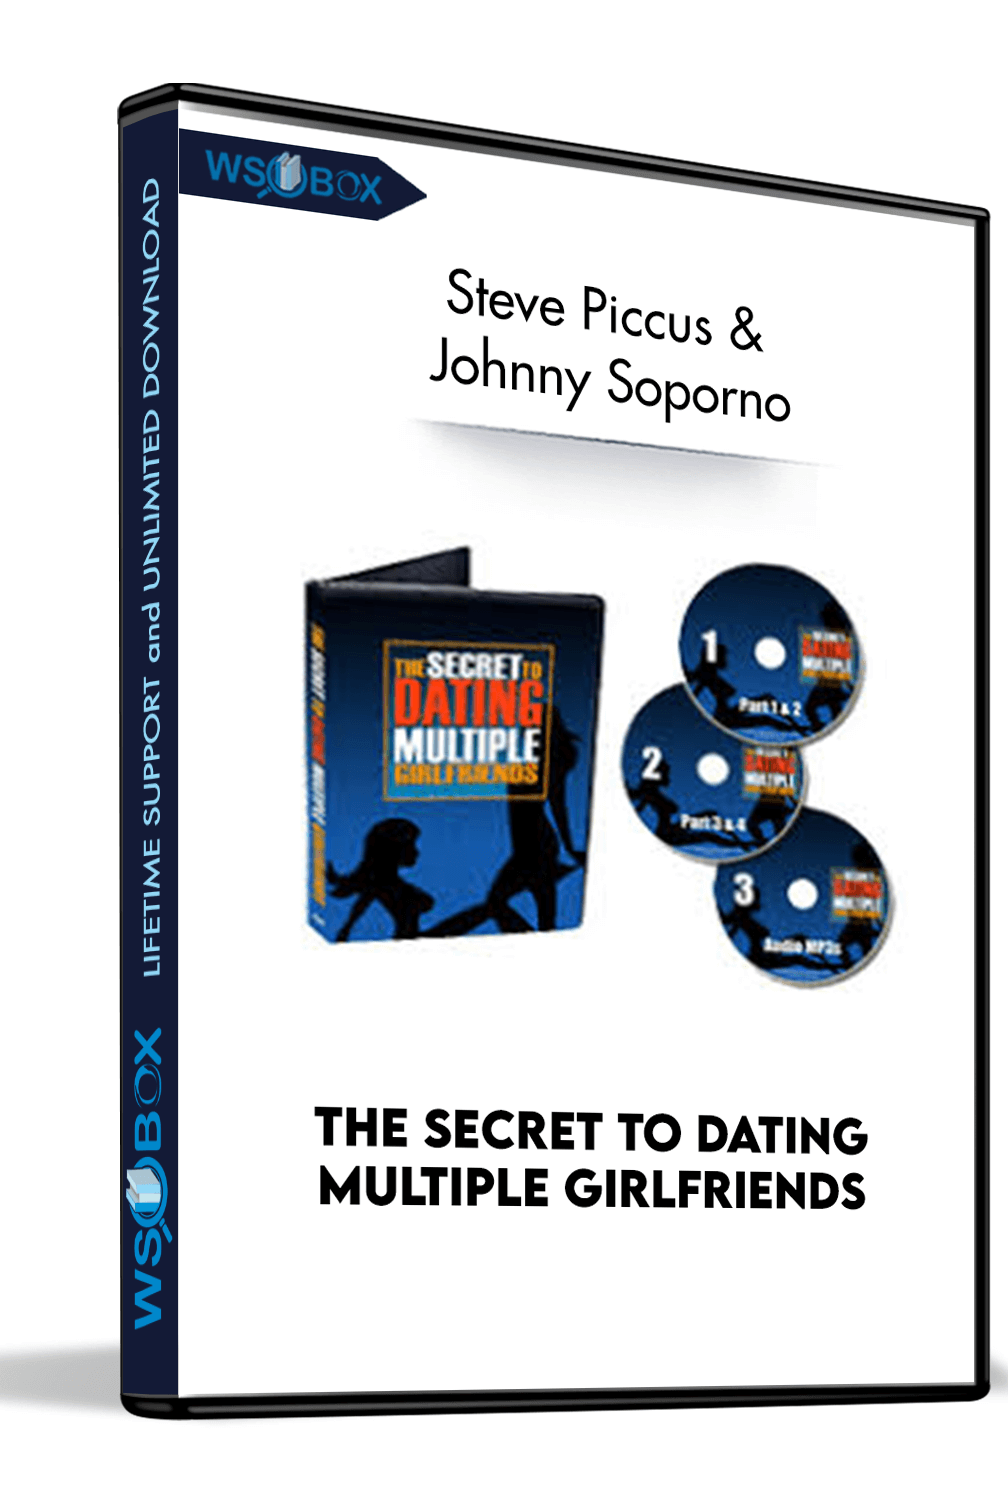 the-secret-to-dating-multiple-girlfriends-steve-piccus-johnny-soporno